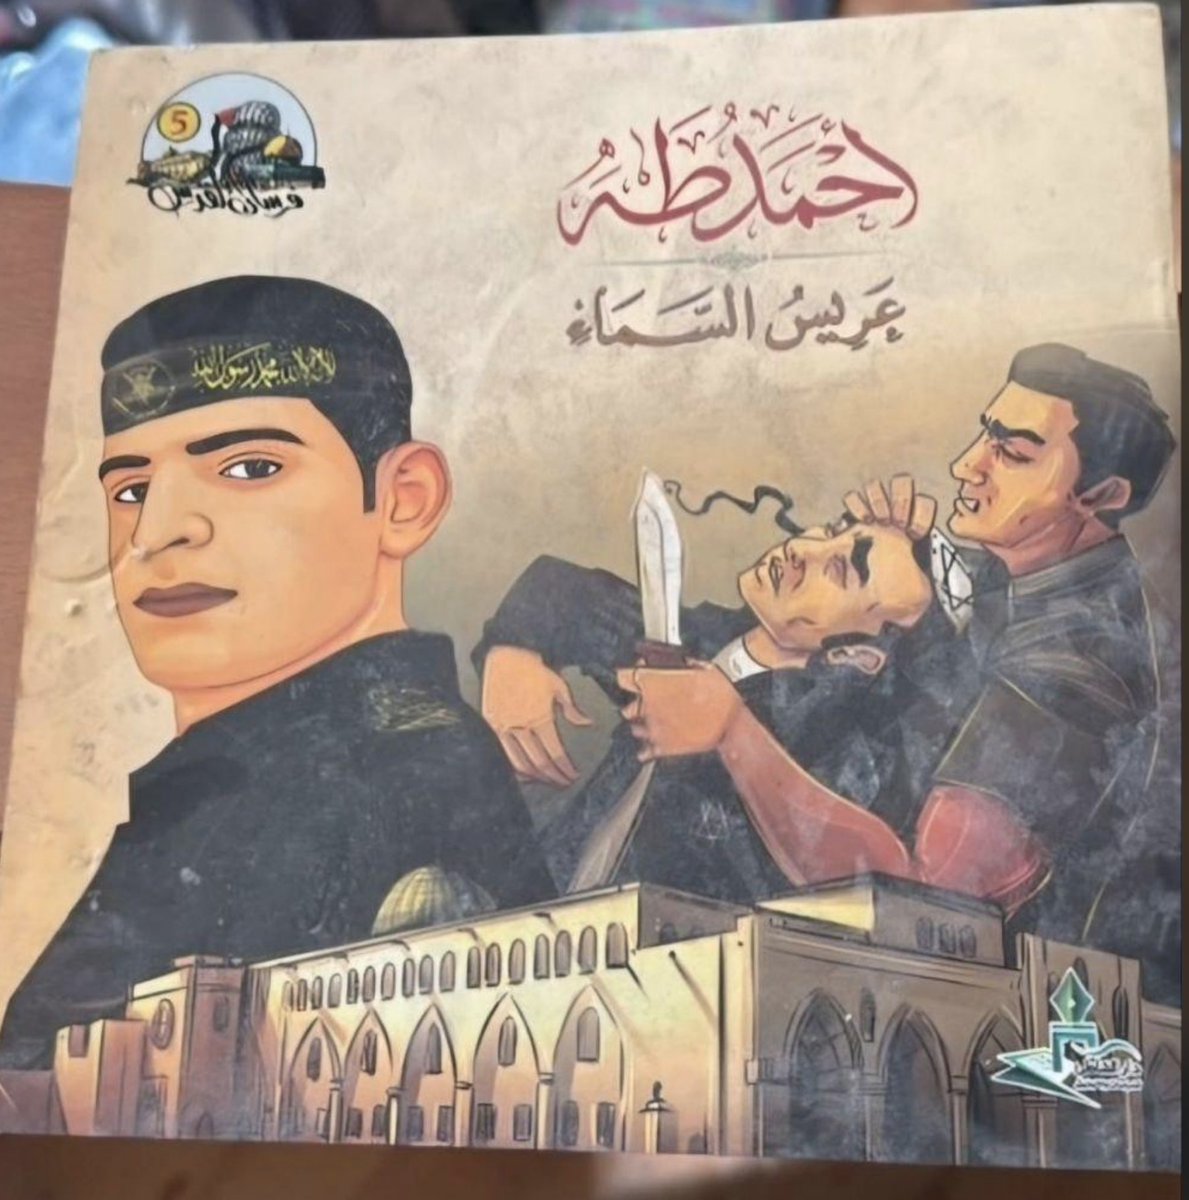 A textbook found in Gaza....

This is what actual 'Grooming' is.